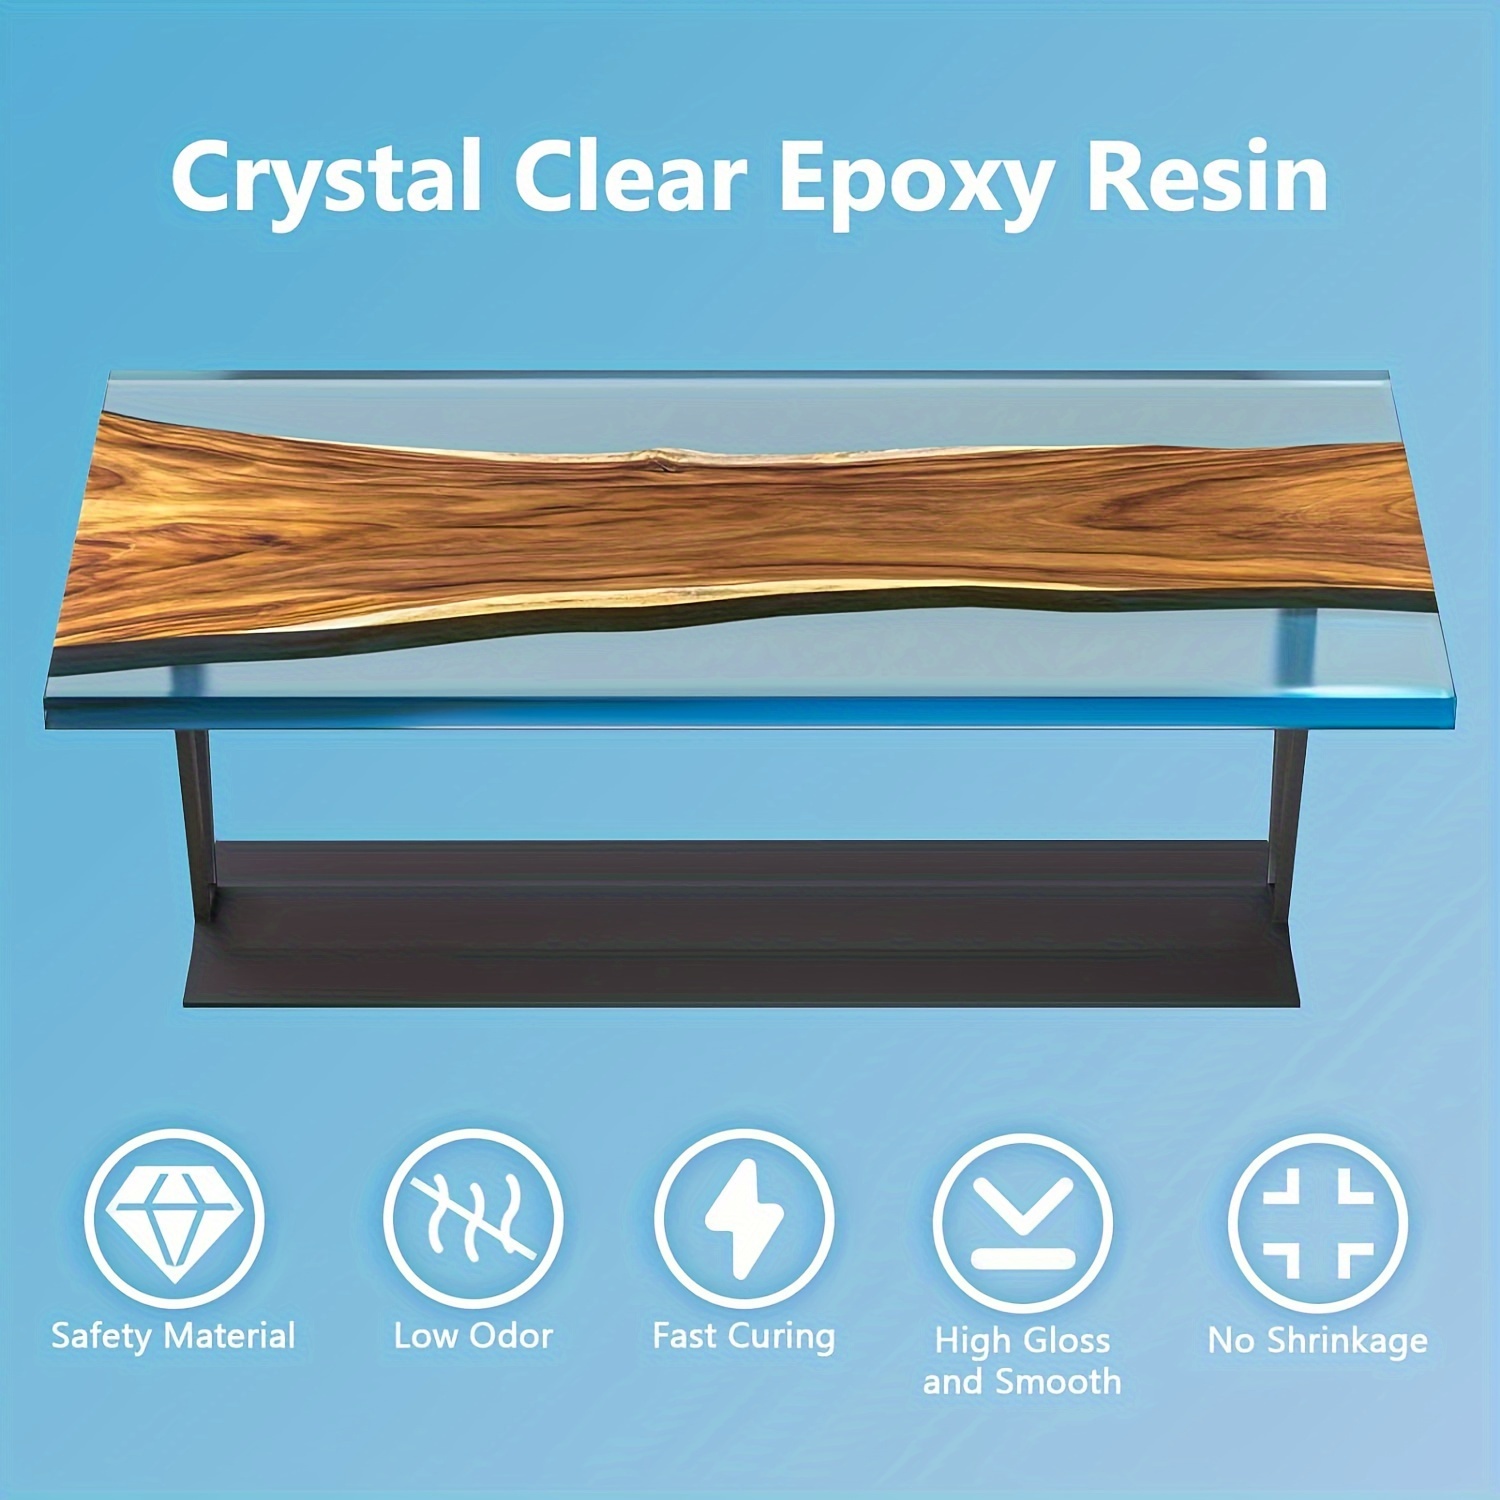 Epoxy Resin Crystal Clear, Resin for Bar Table Top, Wood, Art, Craft, Jewelry, S